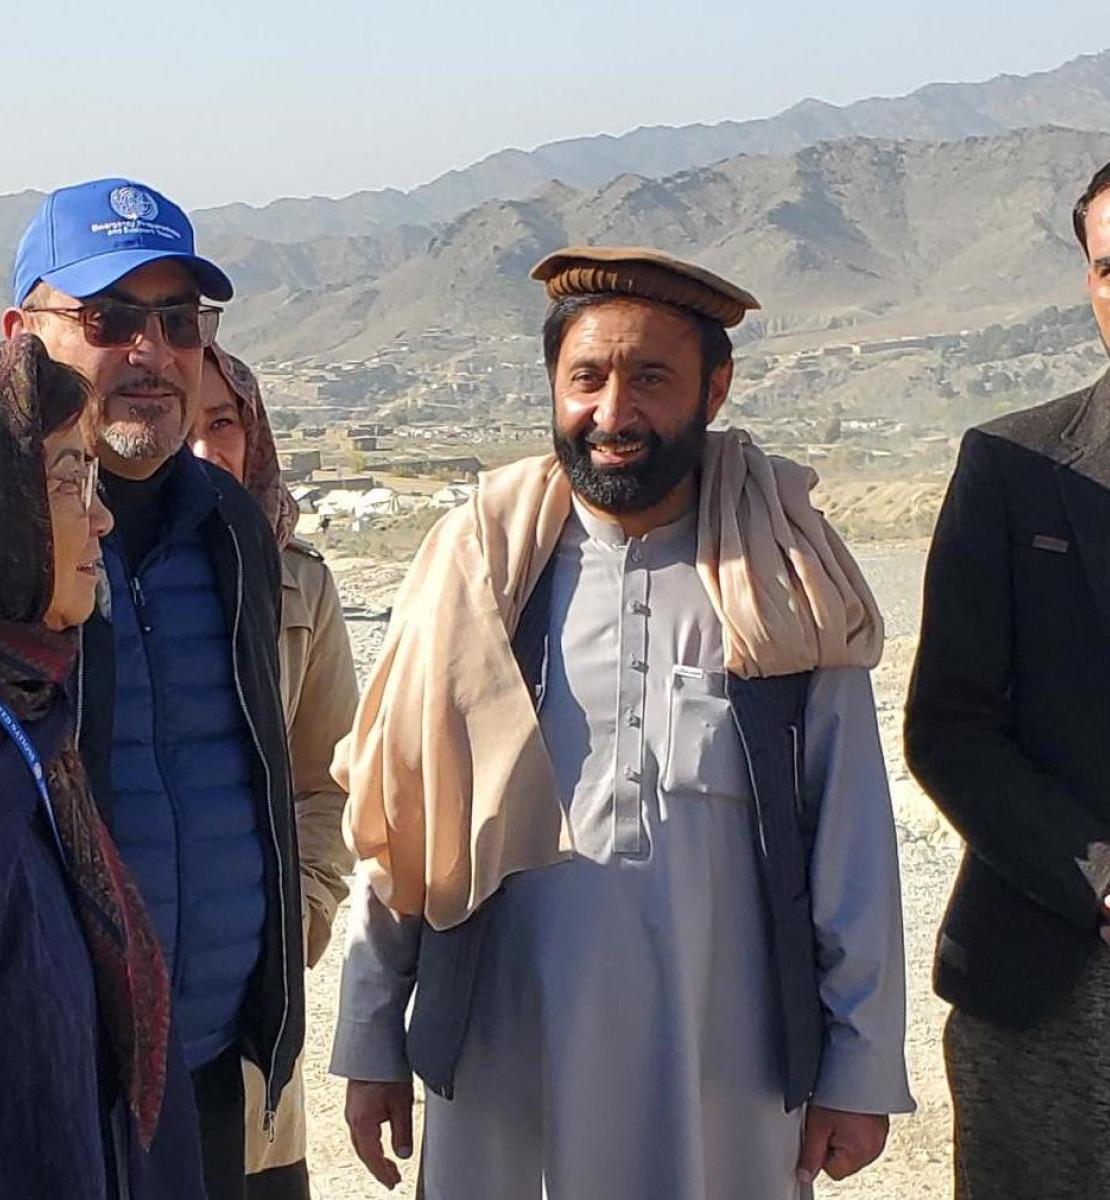 A woman in a scarf stand beside a two men in caps and a man wearing a blazer, with tan mountains in the distance.